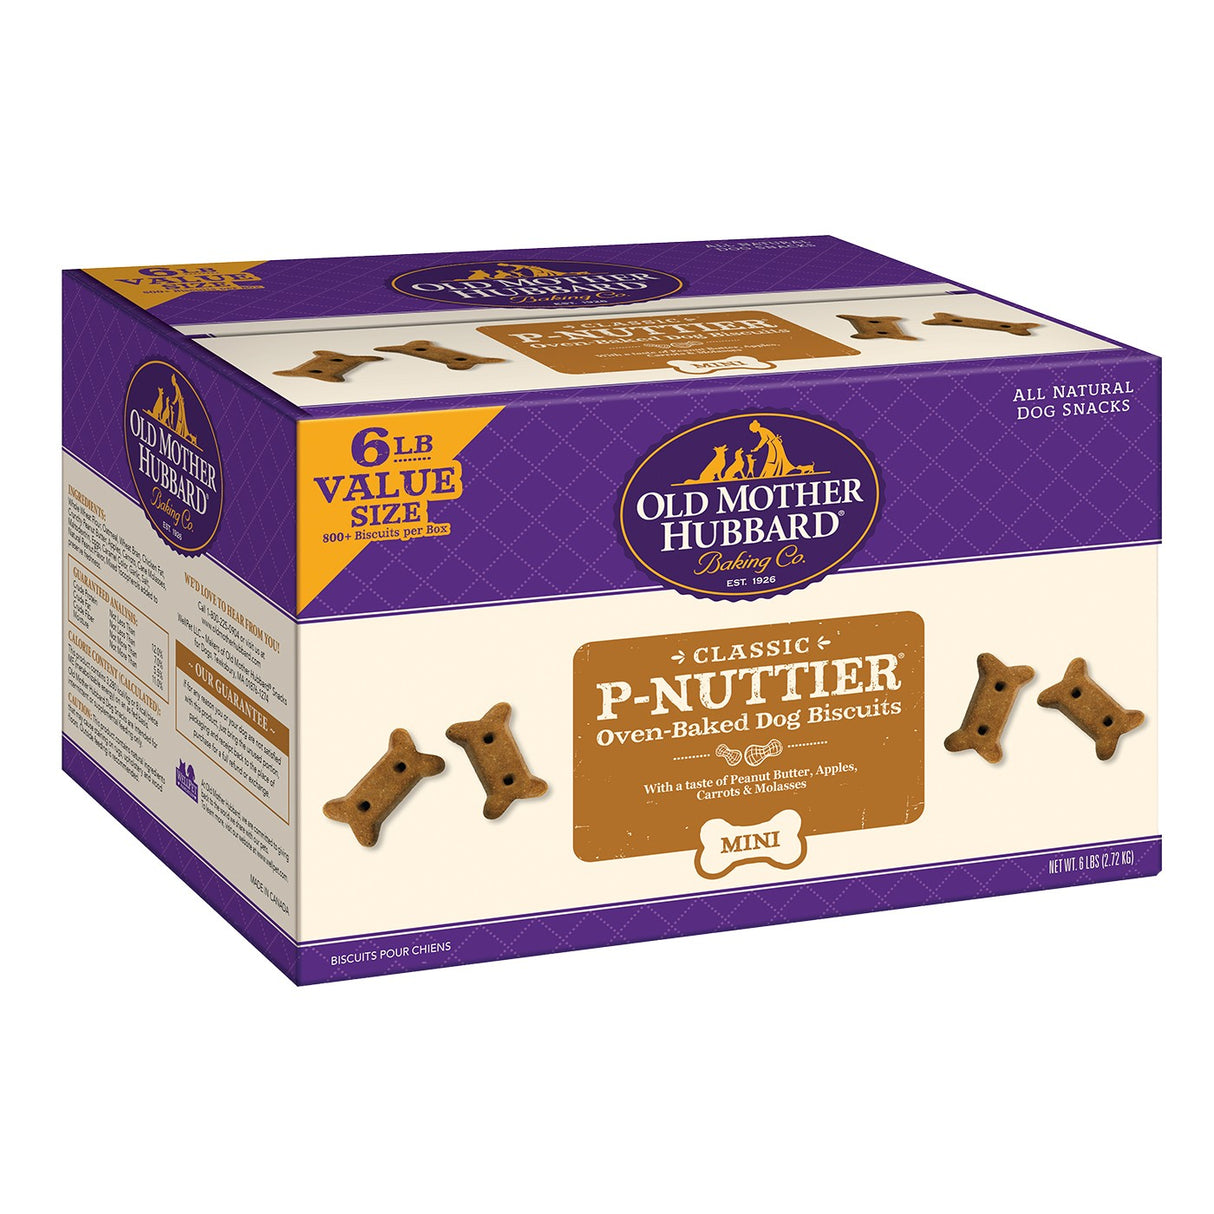 Old Mother Hubbard P-Nuttier Mini Dog Biscuits Box 6 lb.